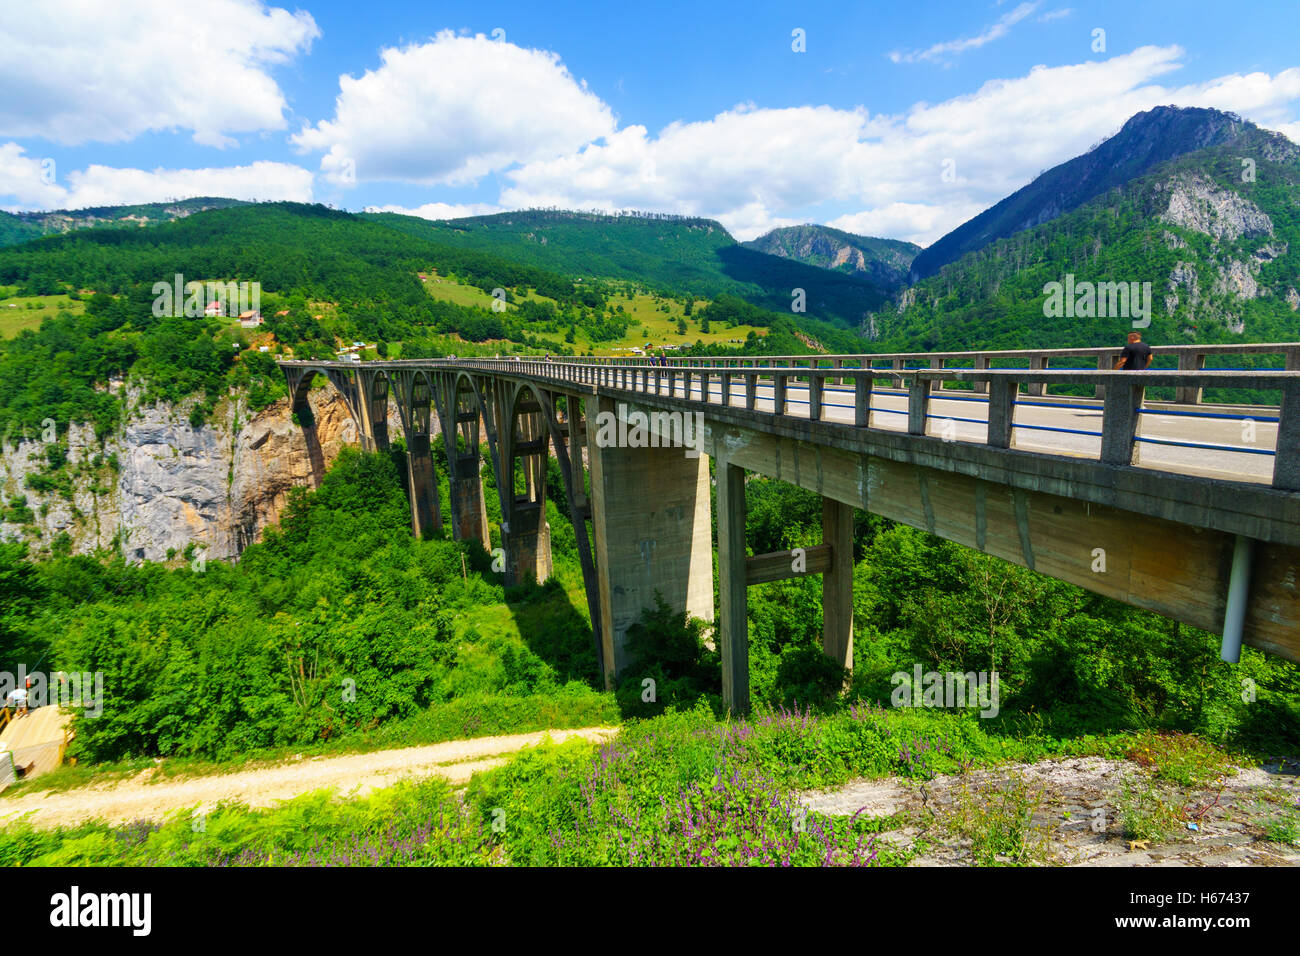 BUDECEVICA, MONTENEGRO - JULY 02, 2015: Scene of the Durdevica Tara Bridge, across the Tara River Canyon, with locals and touris Stock Photo